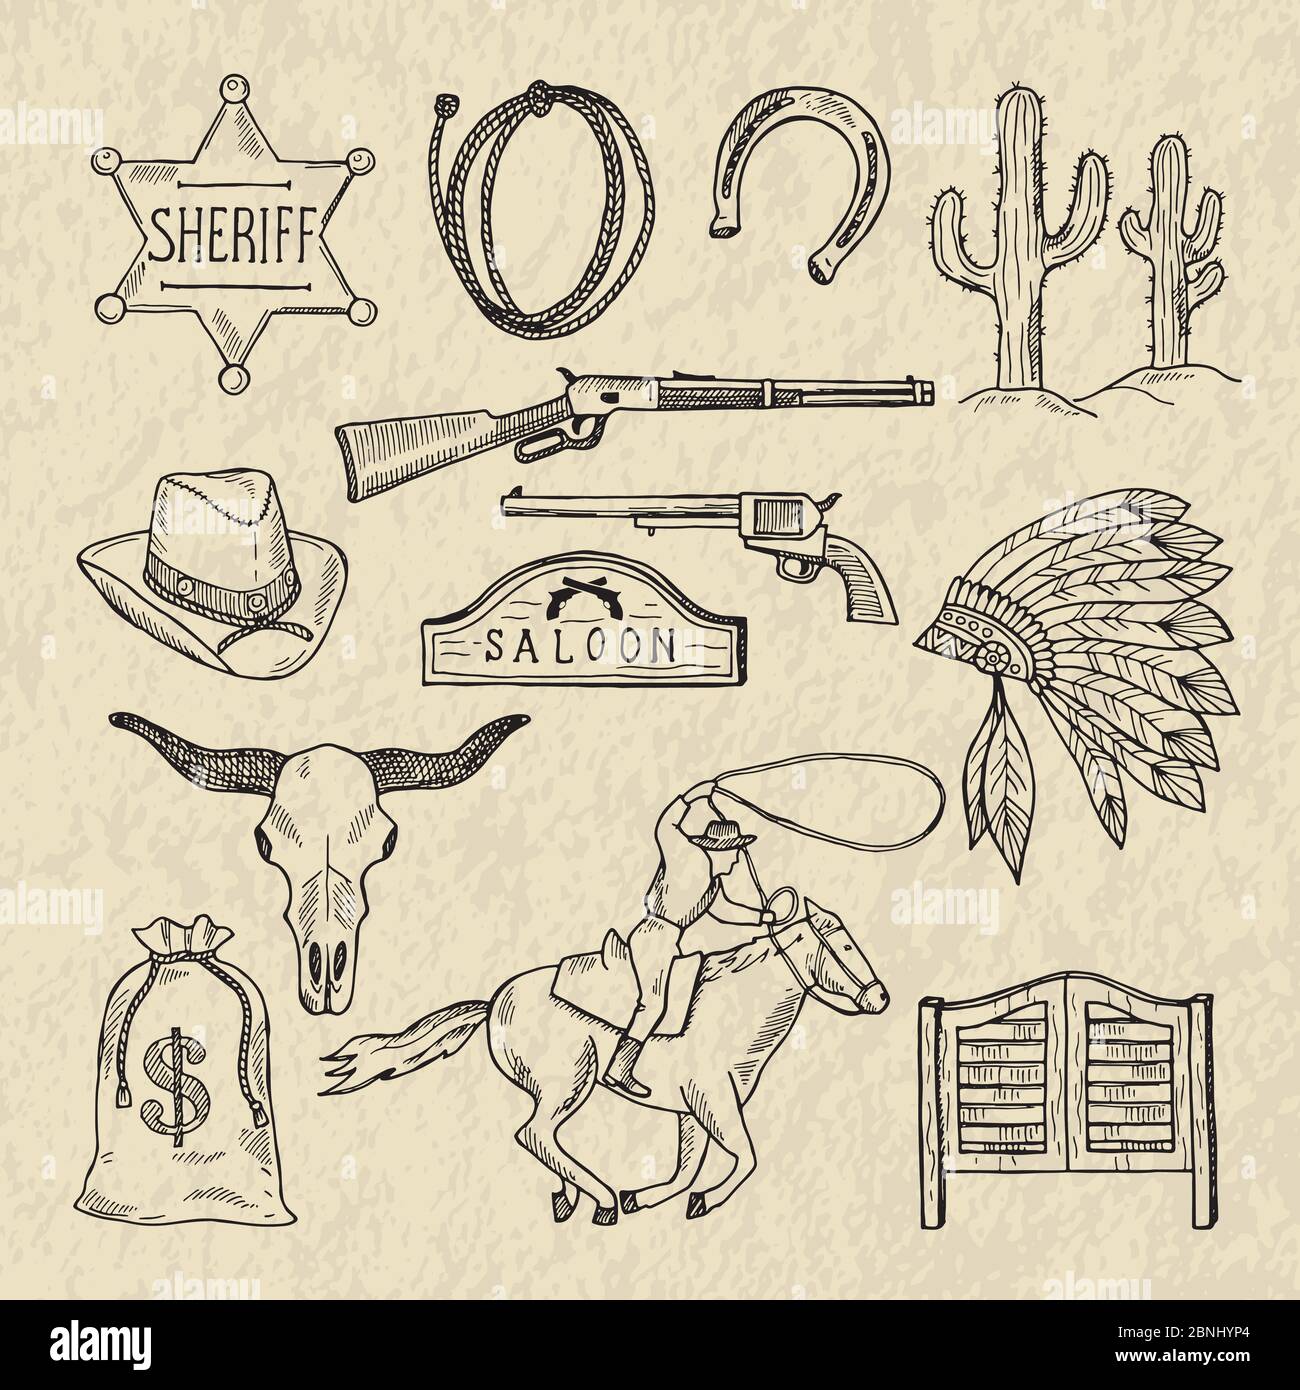 Monochrome hand drawn illustrations of different wild west symbols. Western pictures set isolate Stock Vector